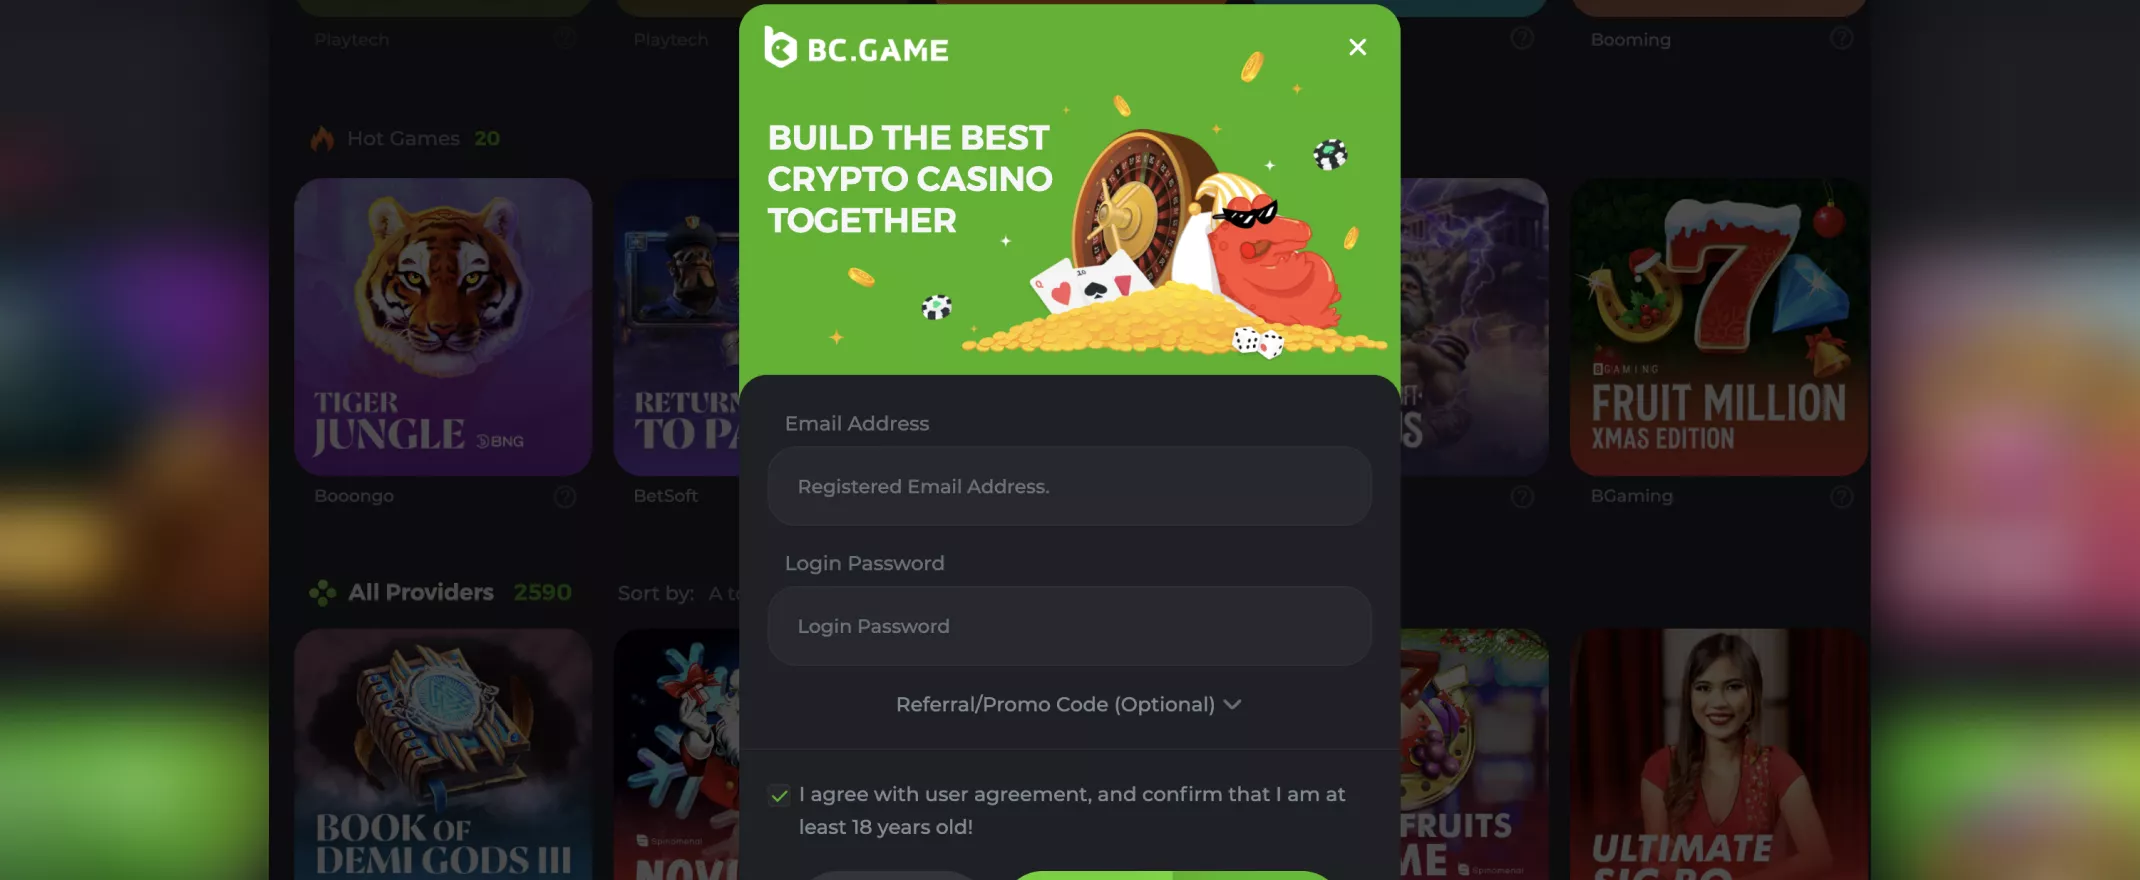 How 5 Stories Will Change The Way You Approach BC.Game crypto casino